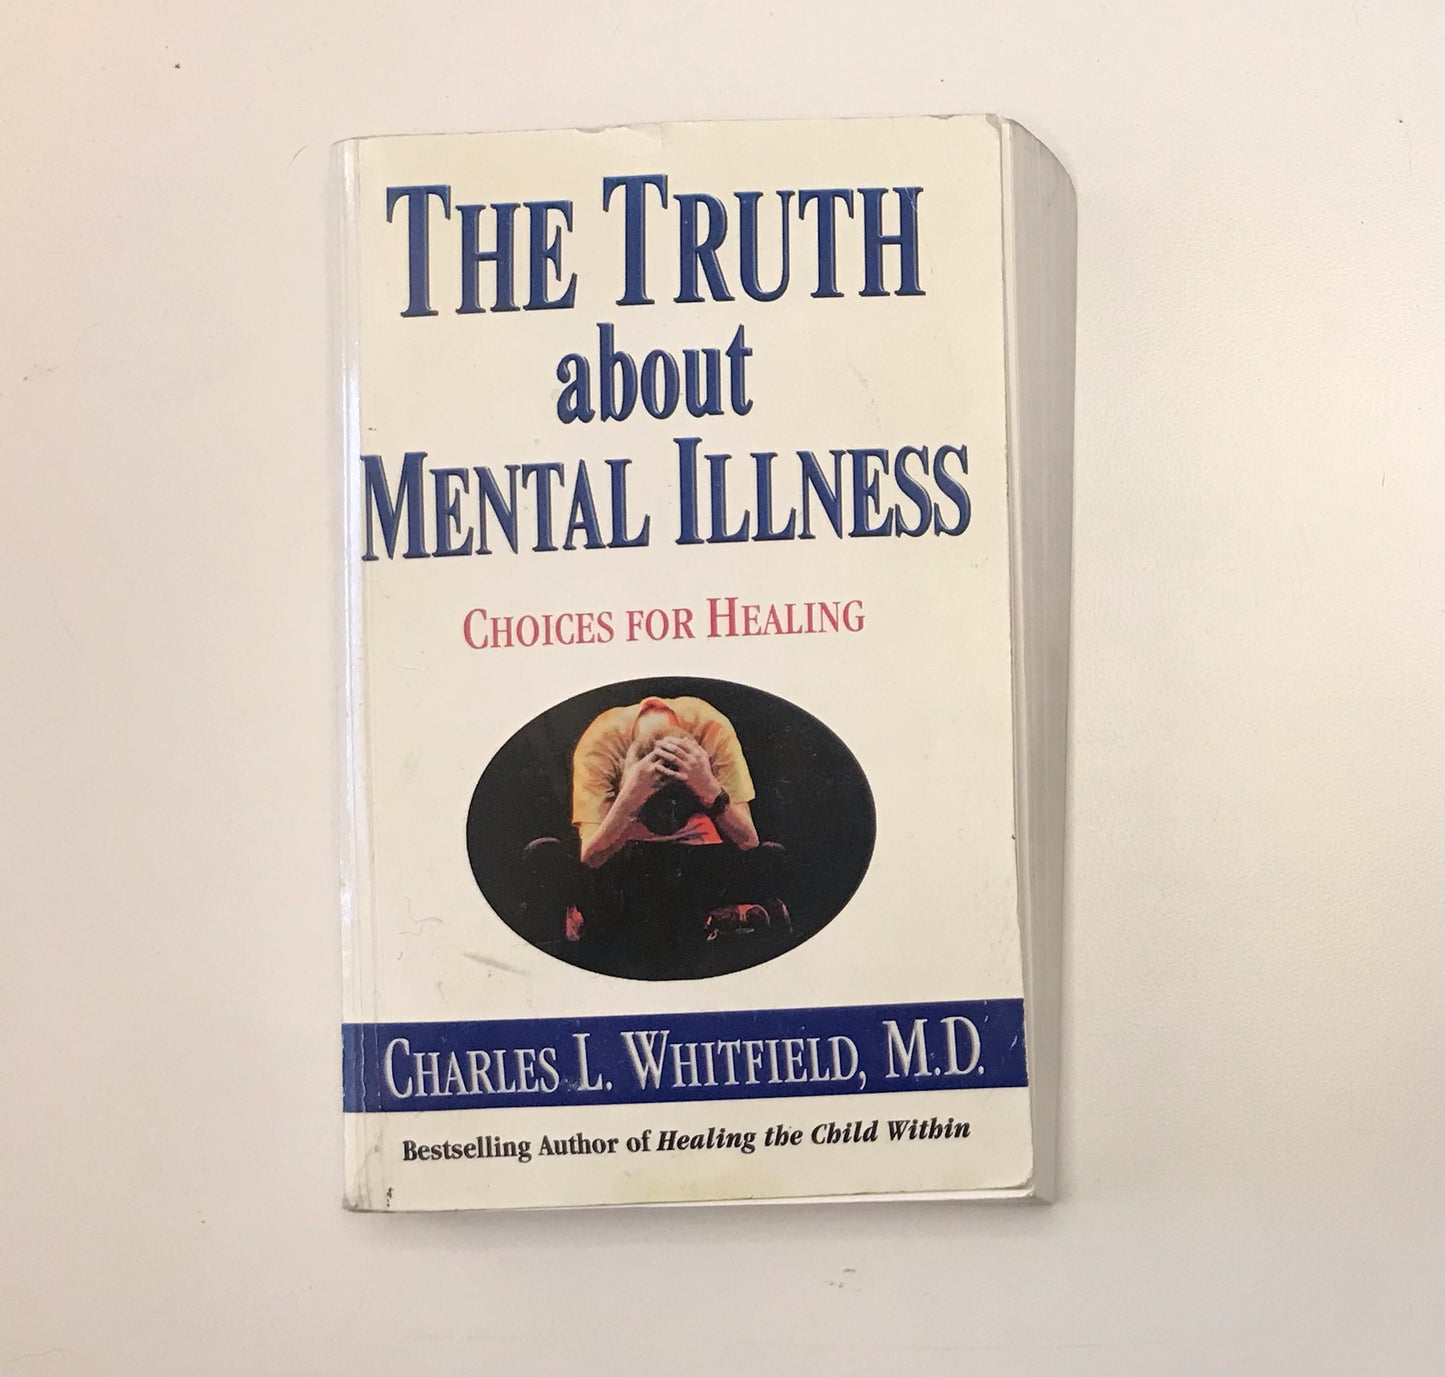 The truth about mental illness: Choices for healing - Charles L. Whitfield, M.D.